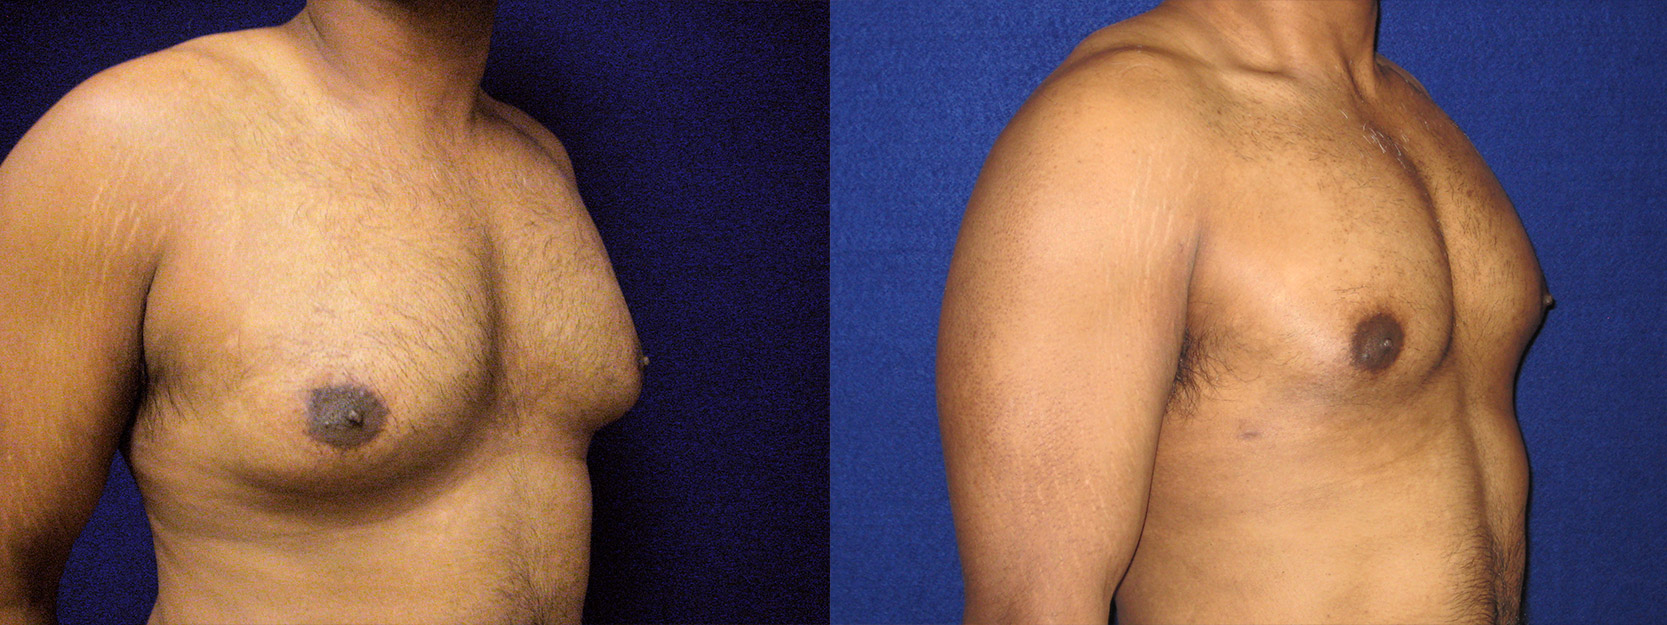 Right 3/4 View - Male Breast Reduction